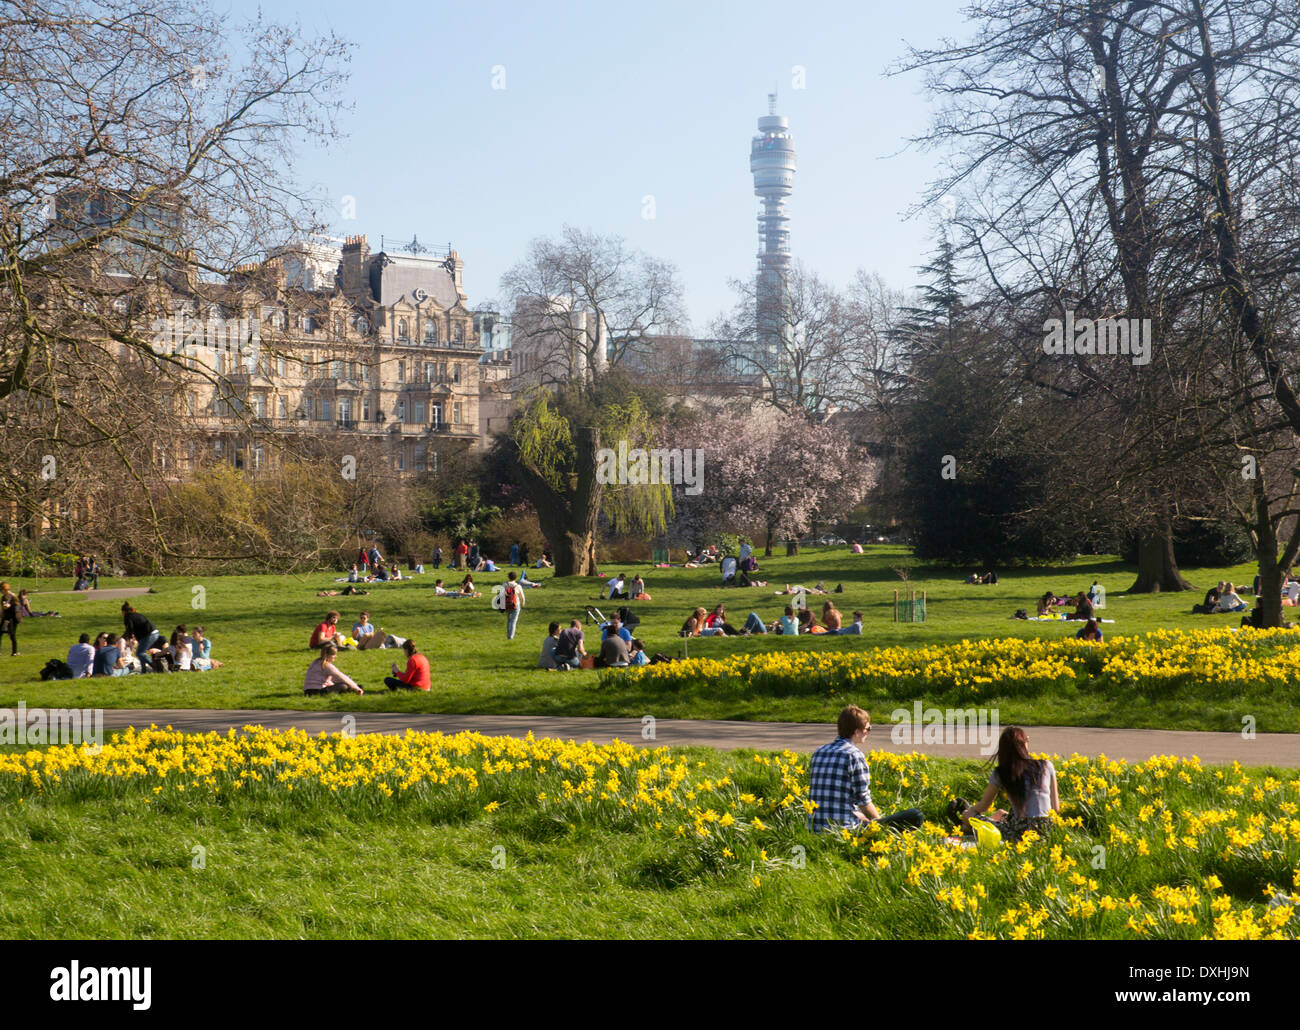 The Regent's Park in spring with daffodils and young couple in 20s sitting in foreground BT Tower in distance London England UK Stock Photo